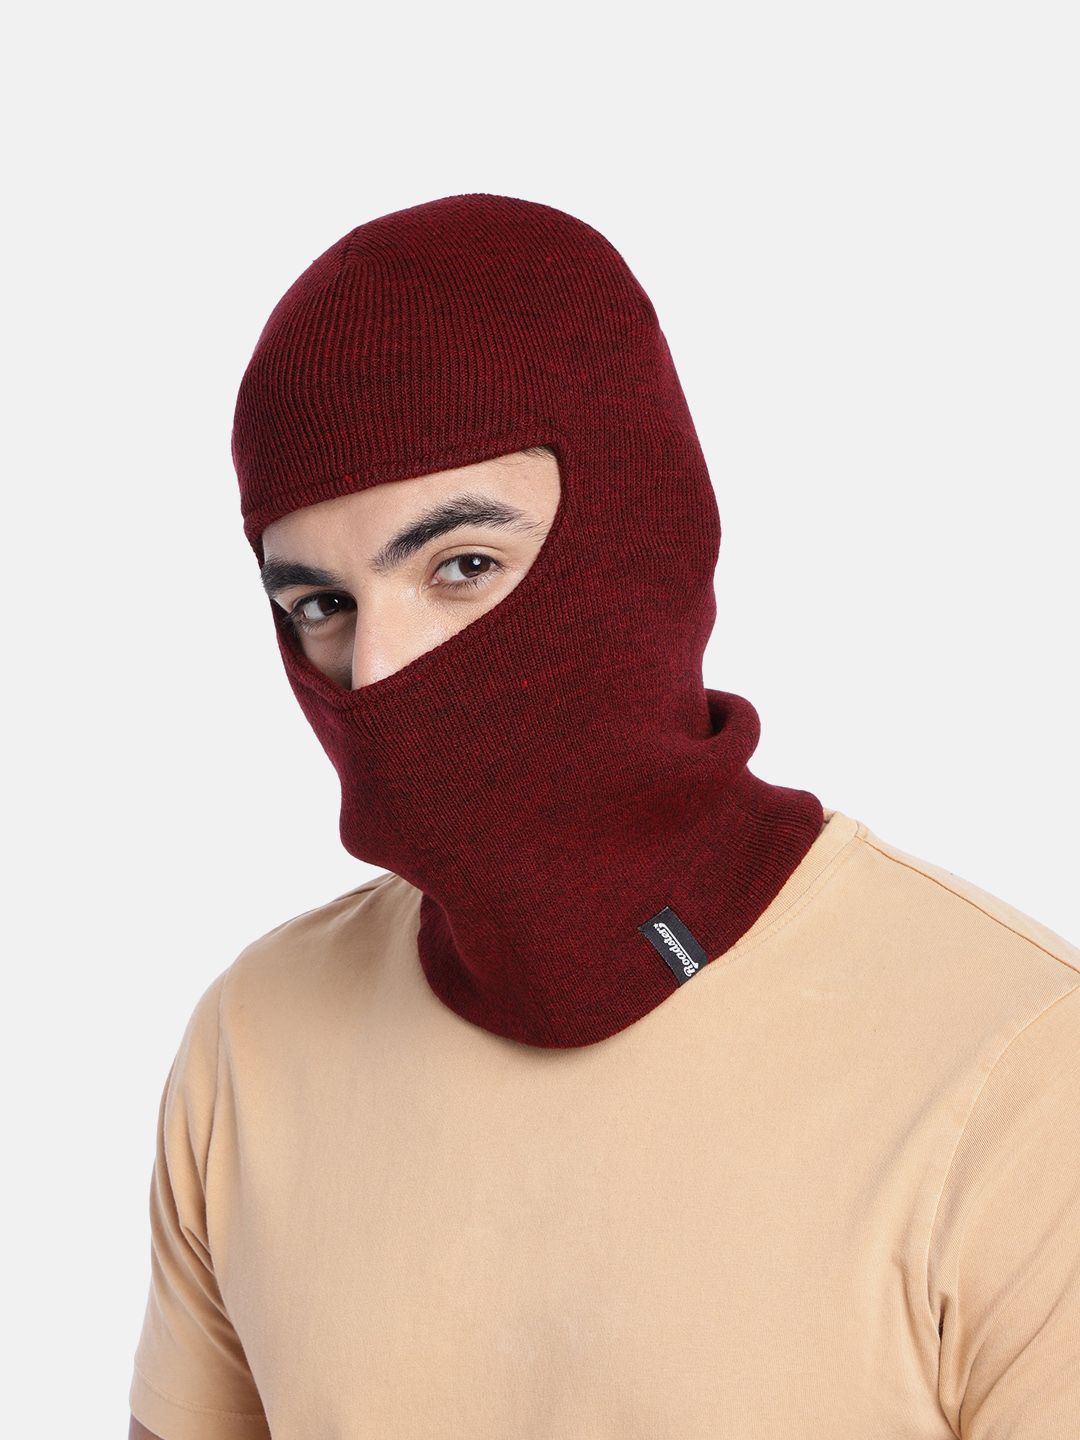 Roadster Unisex Maroon Solid Beanie Price in India